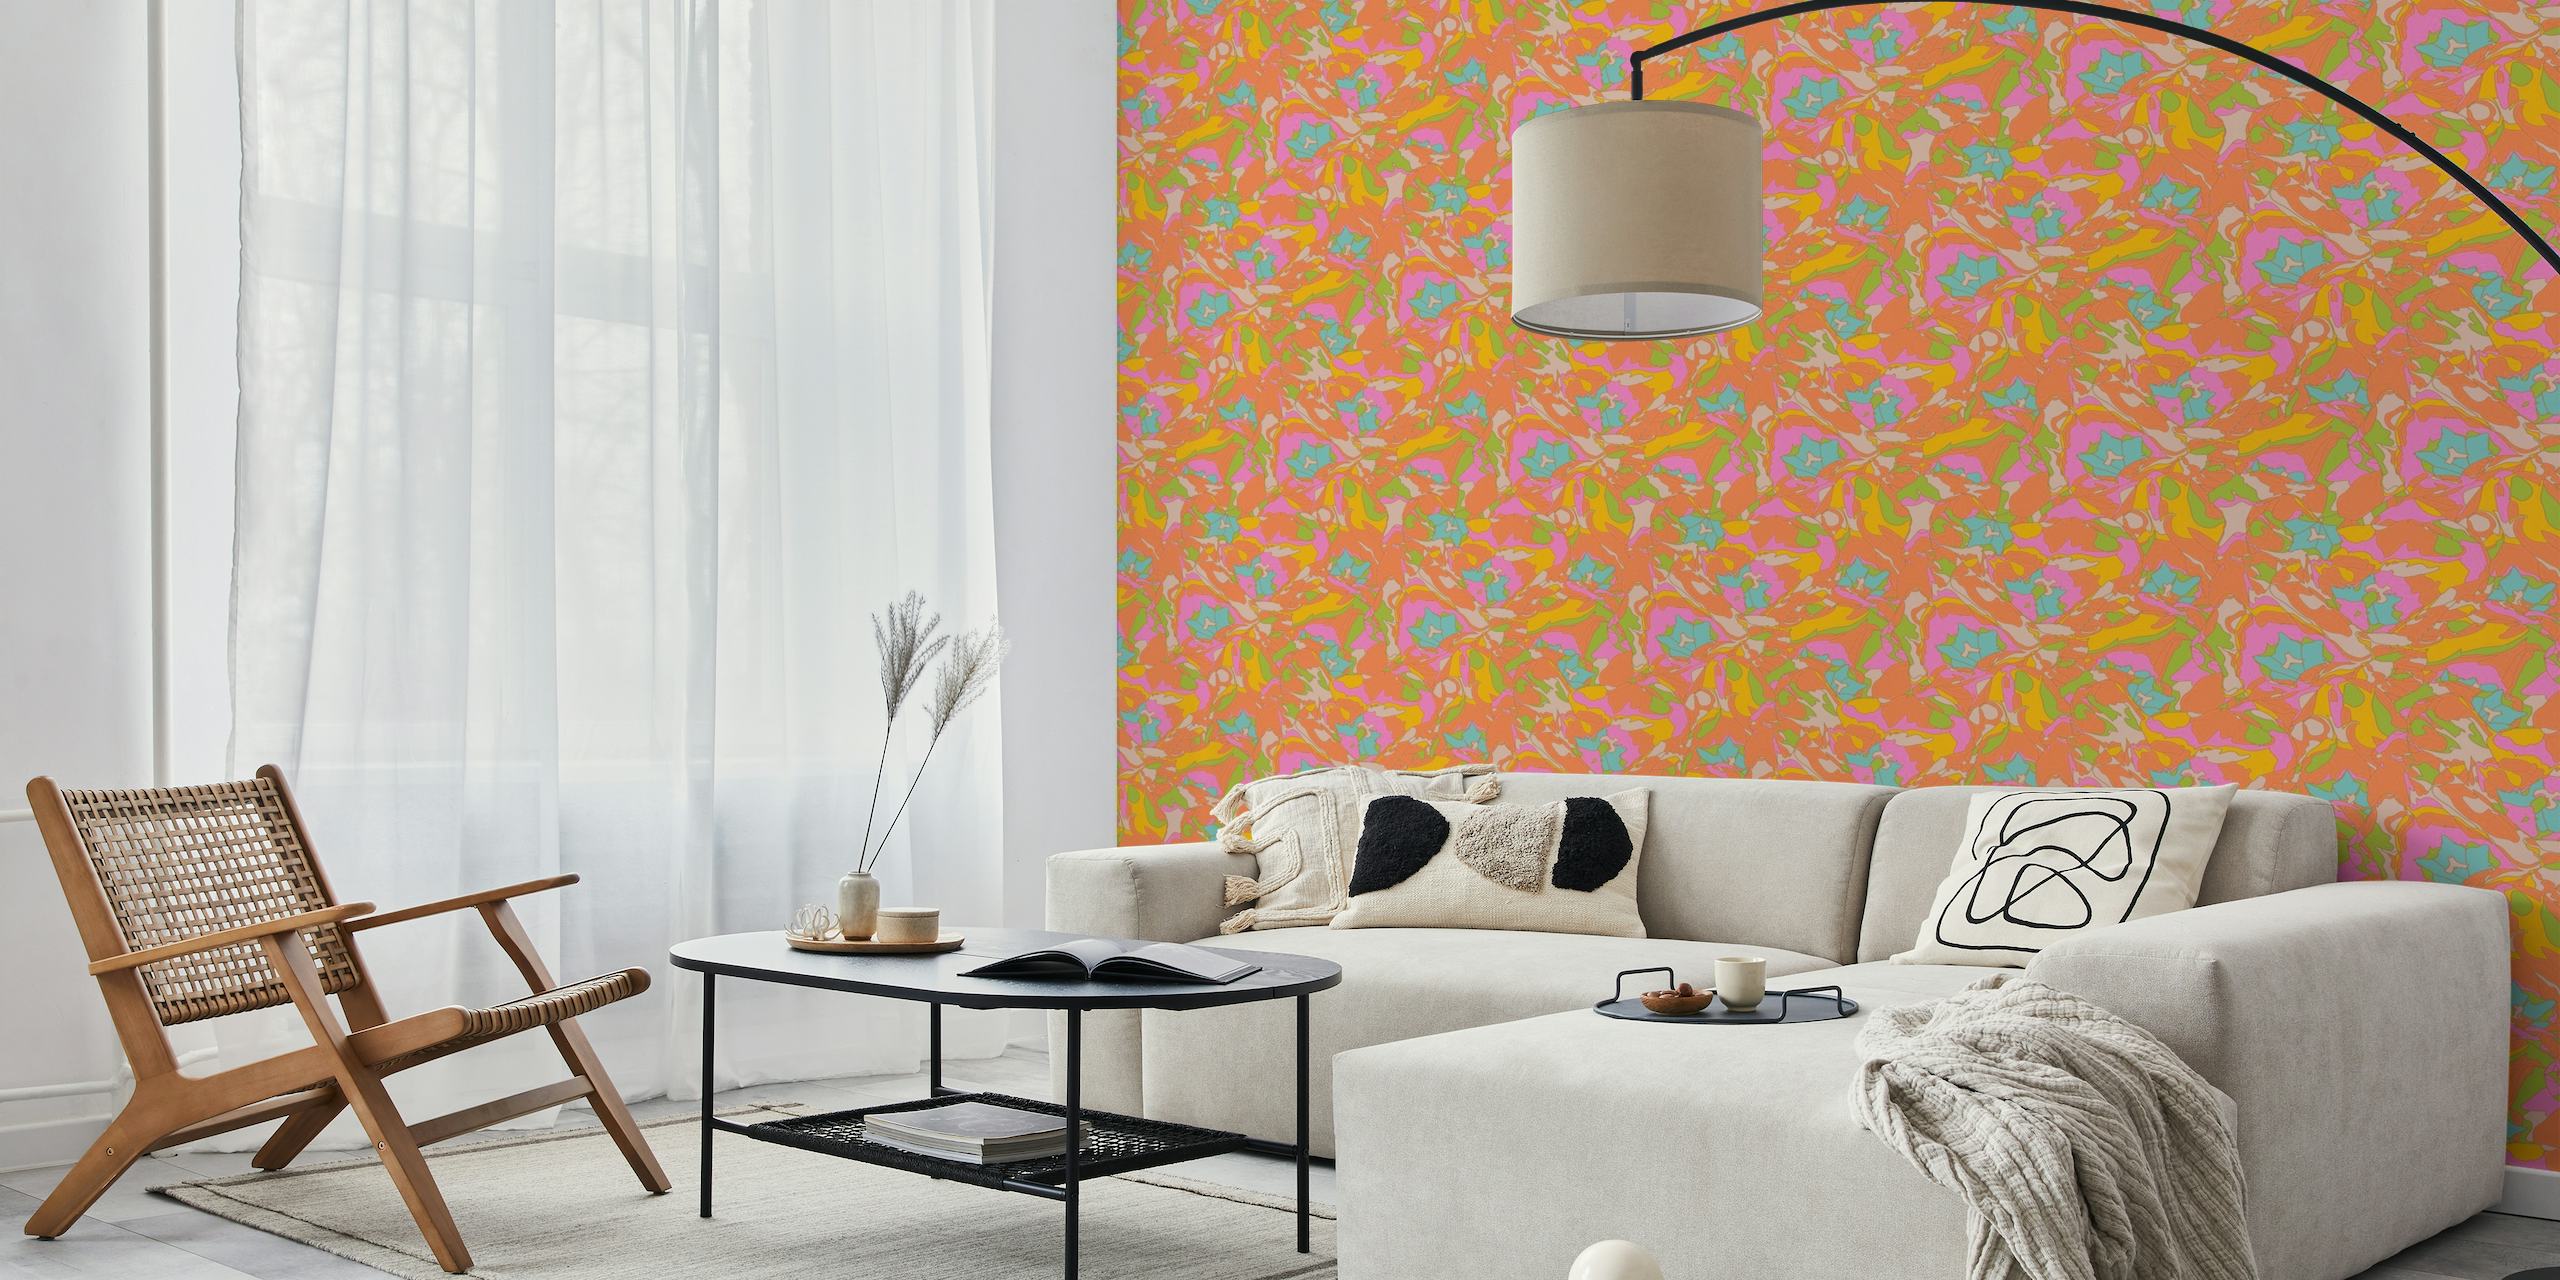 Vibrant 1970s retro-inspired tulip and floral pattern wall mural